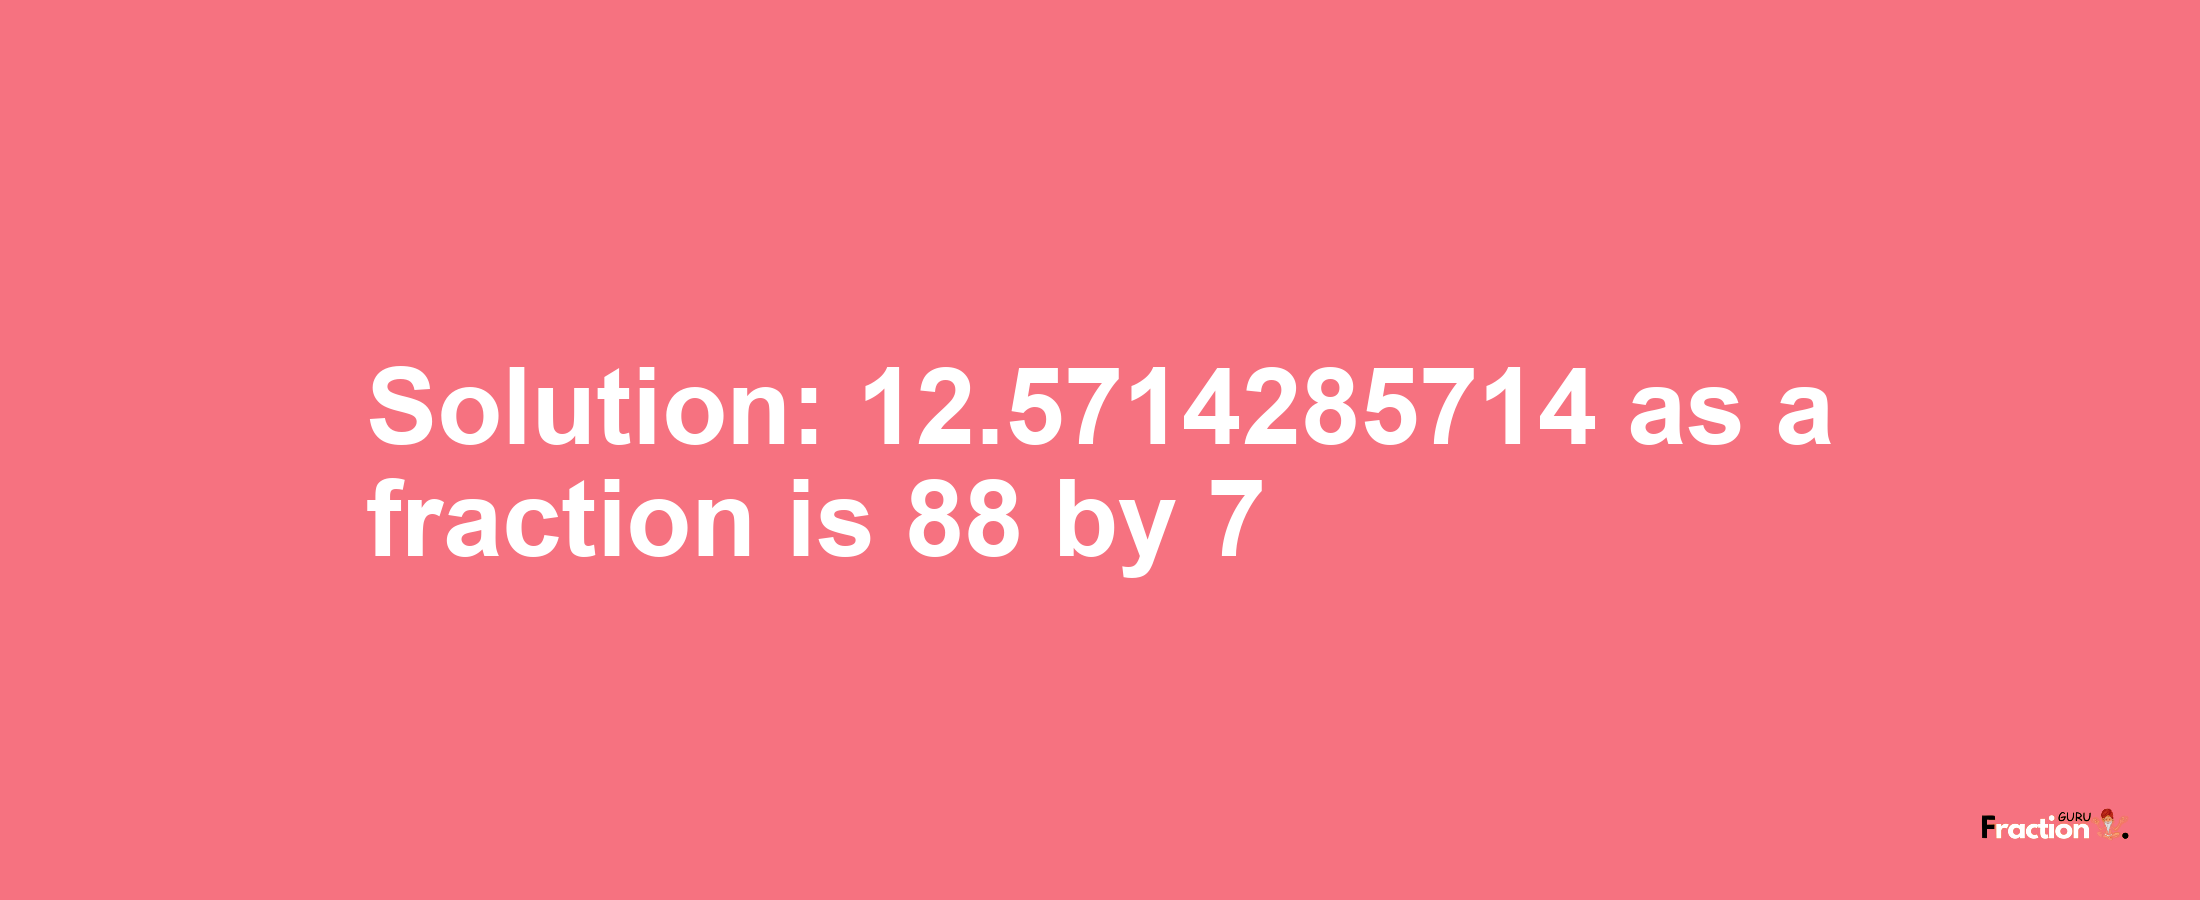 Solution:12.5714285714 as a fraction is 88/7